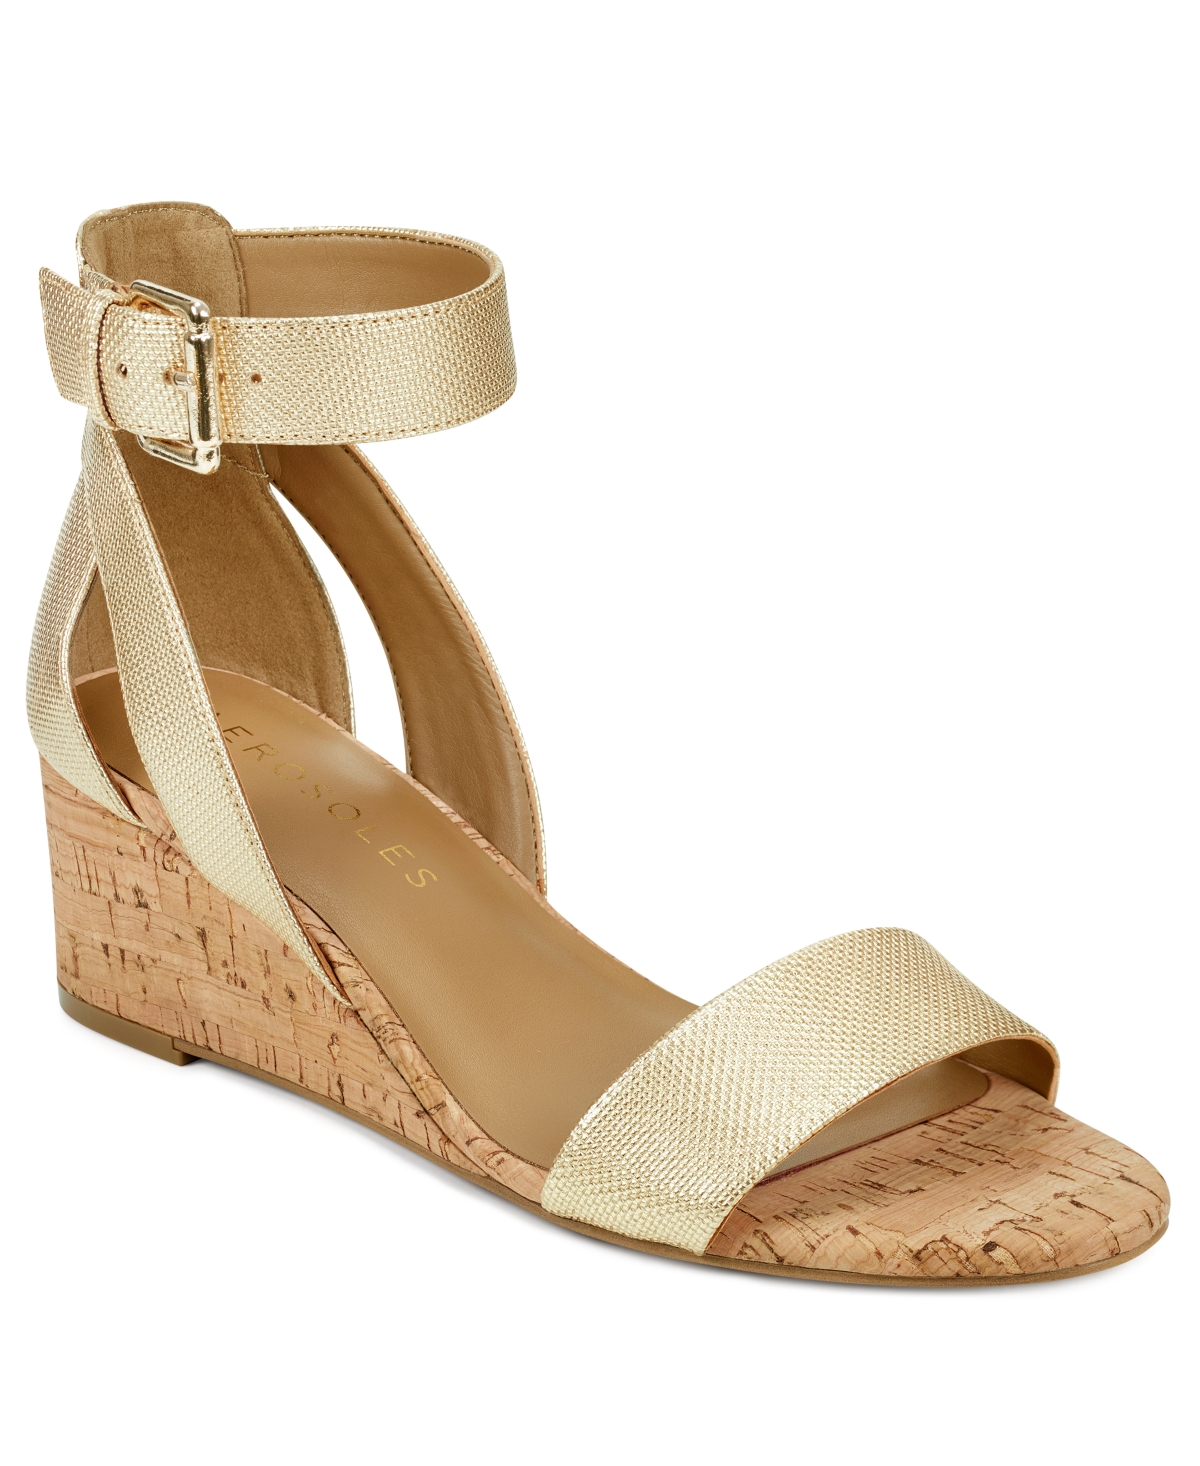 UPC 887039887563 product image for Aerosoles Willowbrook Wedge Sandals Women's Shoes | upcitemdb.com